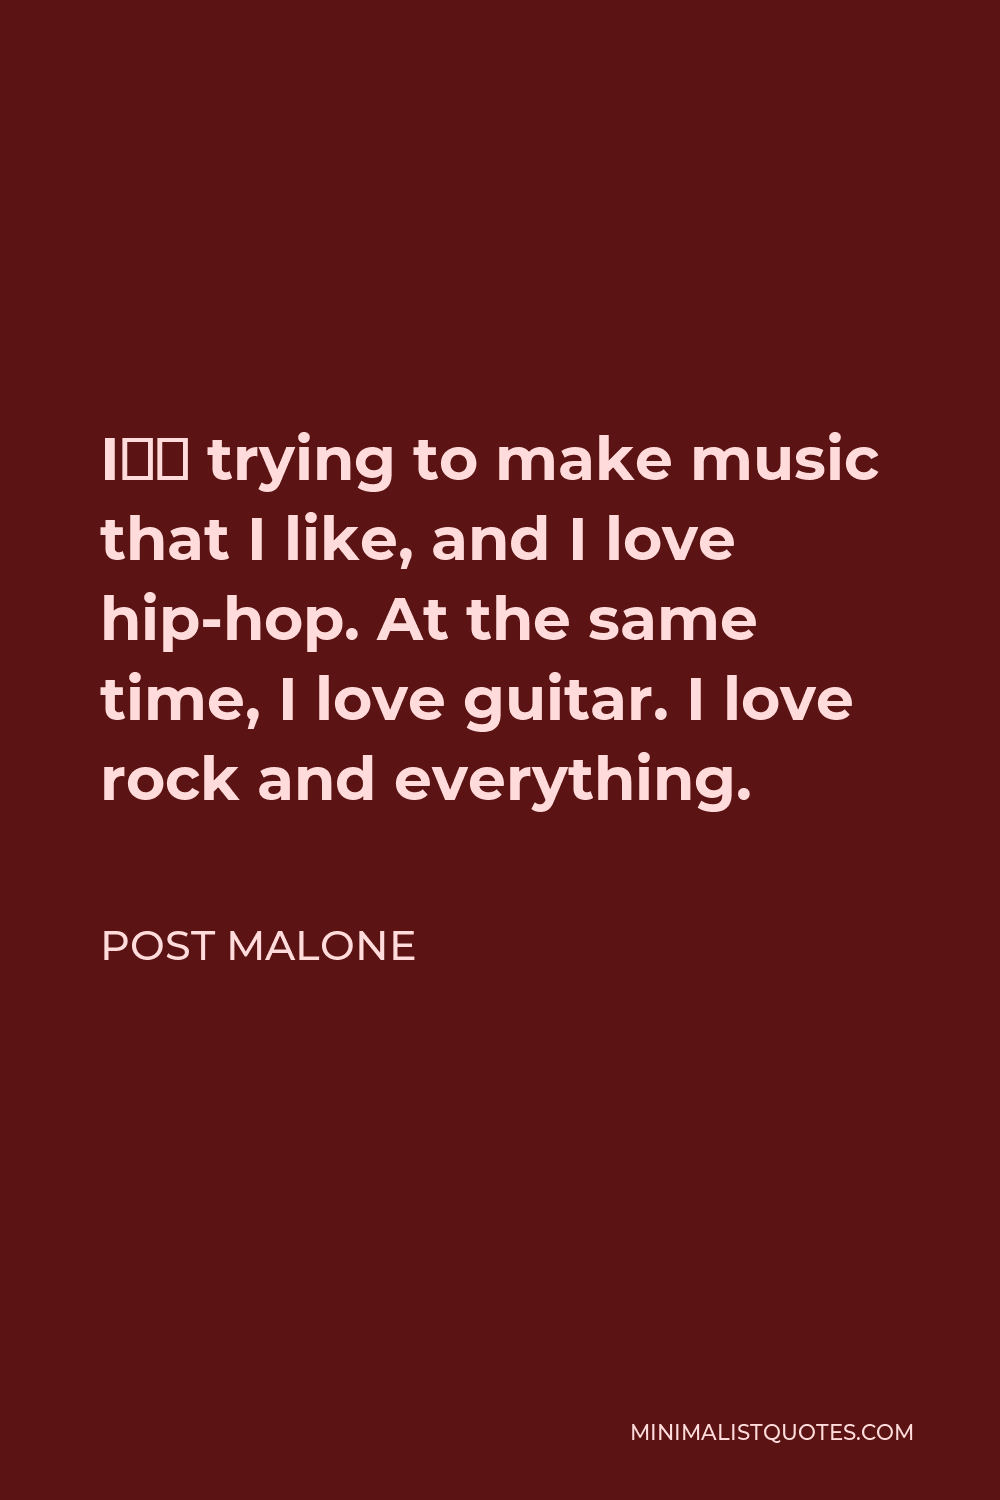 Post Malone Quote - I’m trying to make music that I like, and I love hip-hop. At the same time, I love guitar. I love rock and everything.